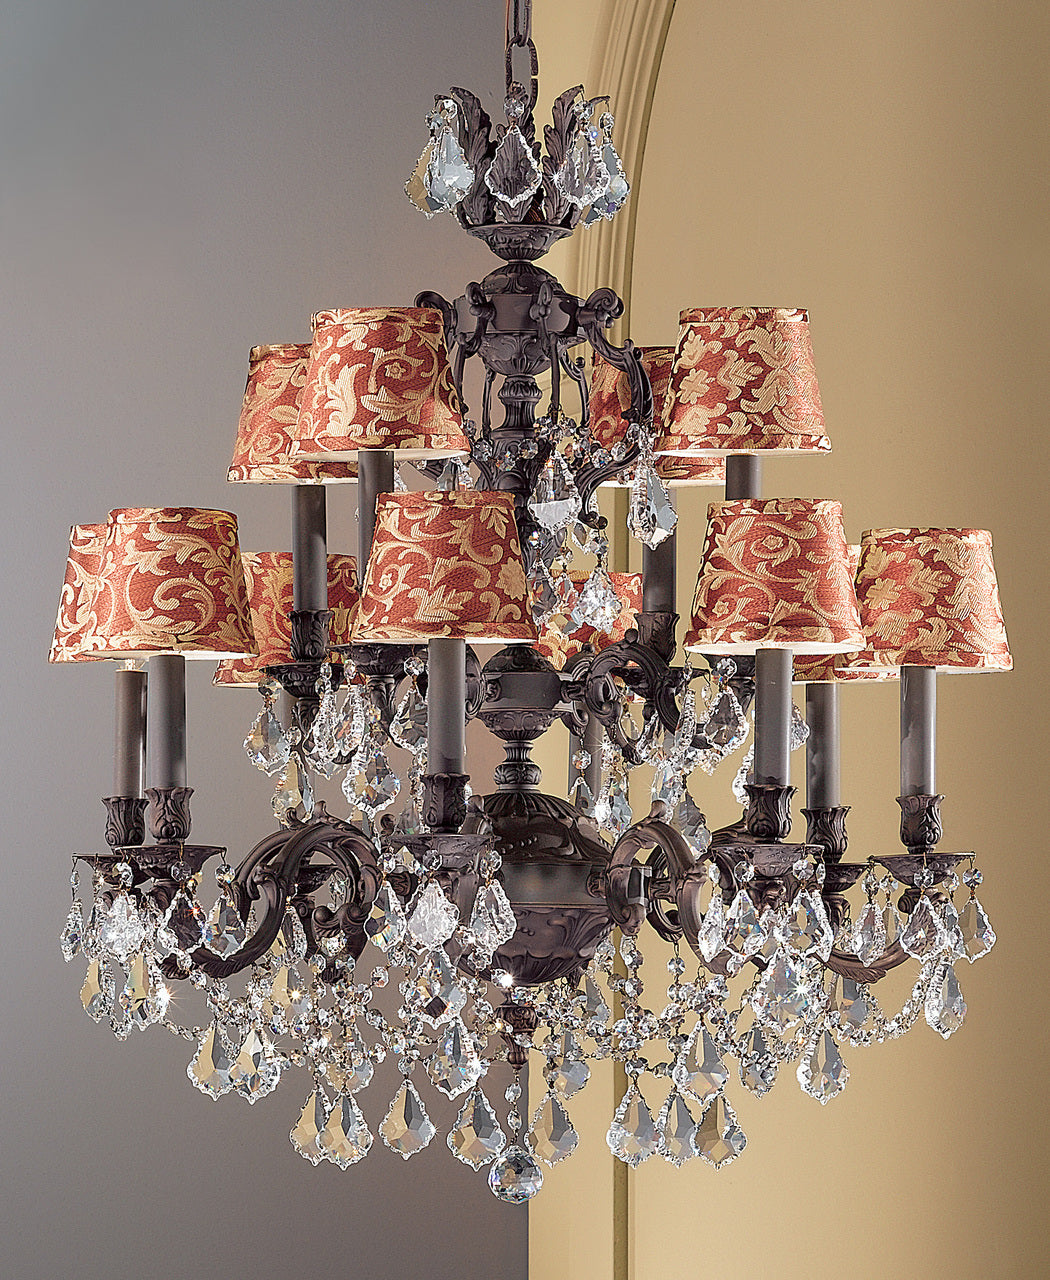 Classic Lighting 57389 AGP CP Chateau Imperial Crystal Chandelier in Aged Pewter (Imported from Spain)